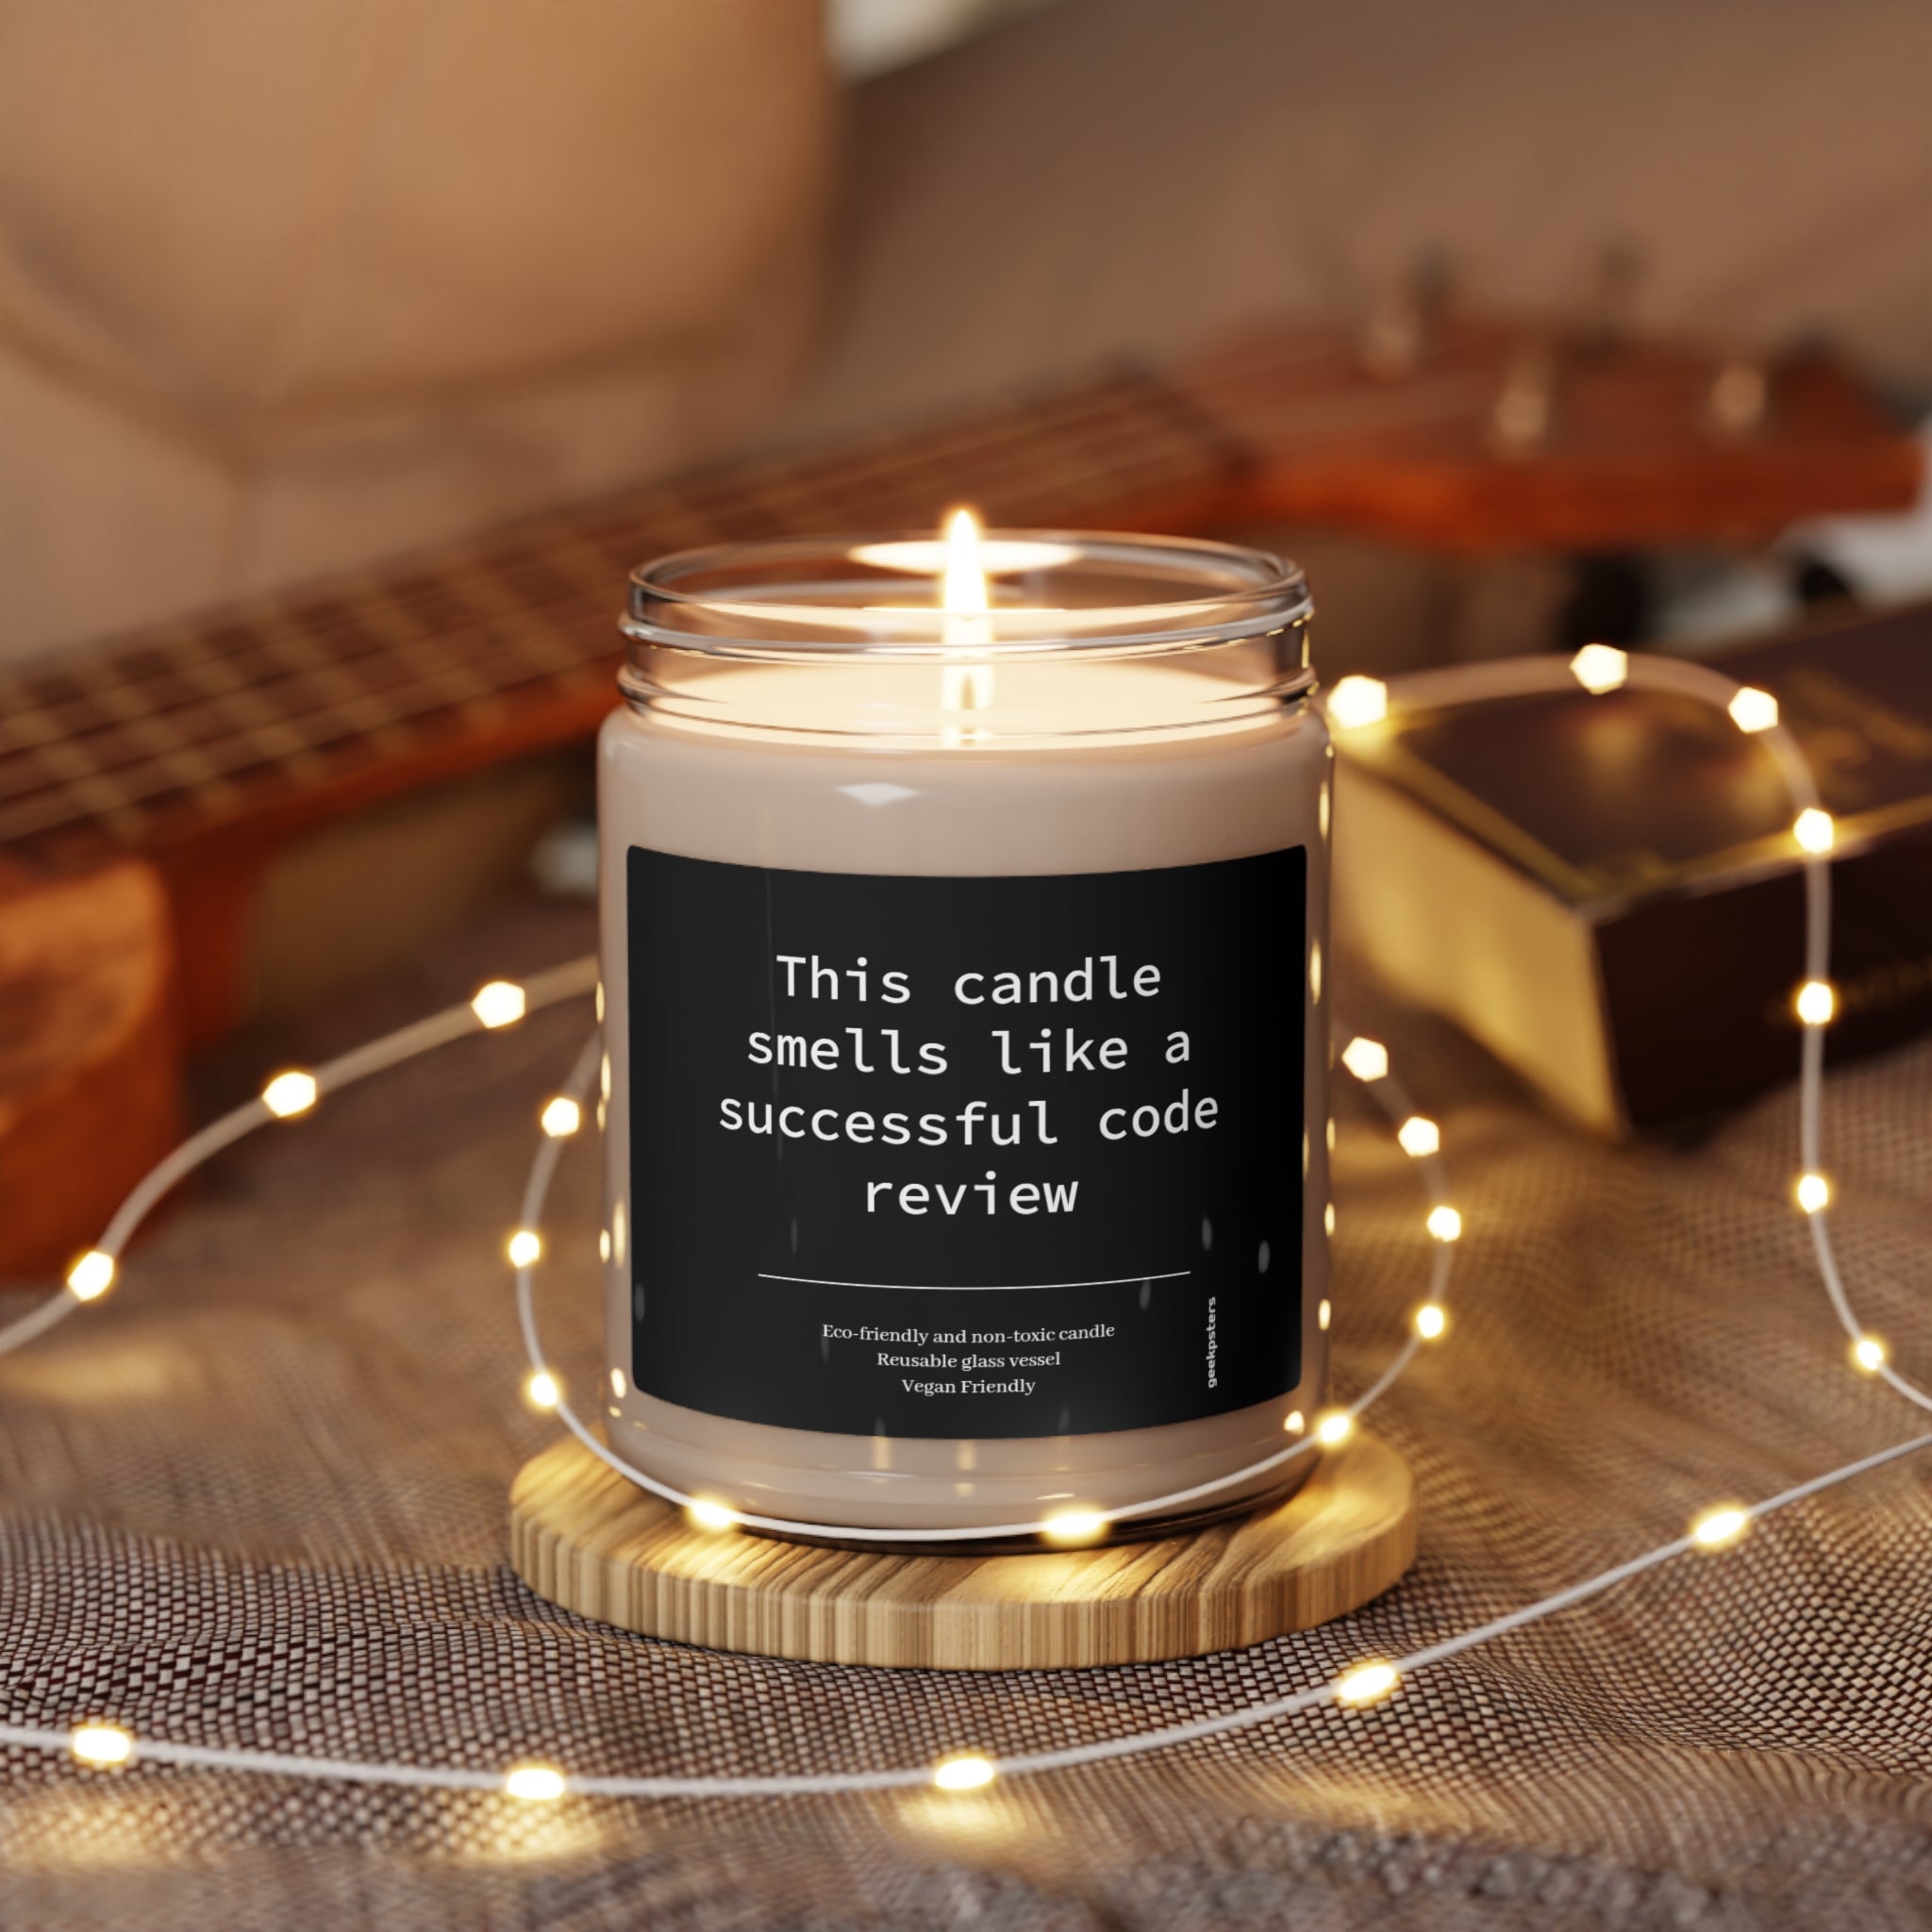 A "This Candle Smells Like a Successful Code Review" scented soy candle in a glass jar with a humorous label that reads "this candle smells like a successful code review" placed on a wooden surface surrounded by twinkling lights.